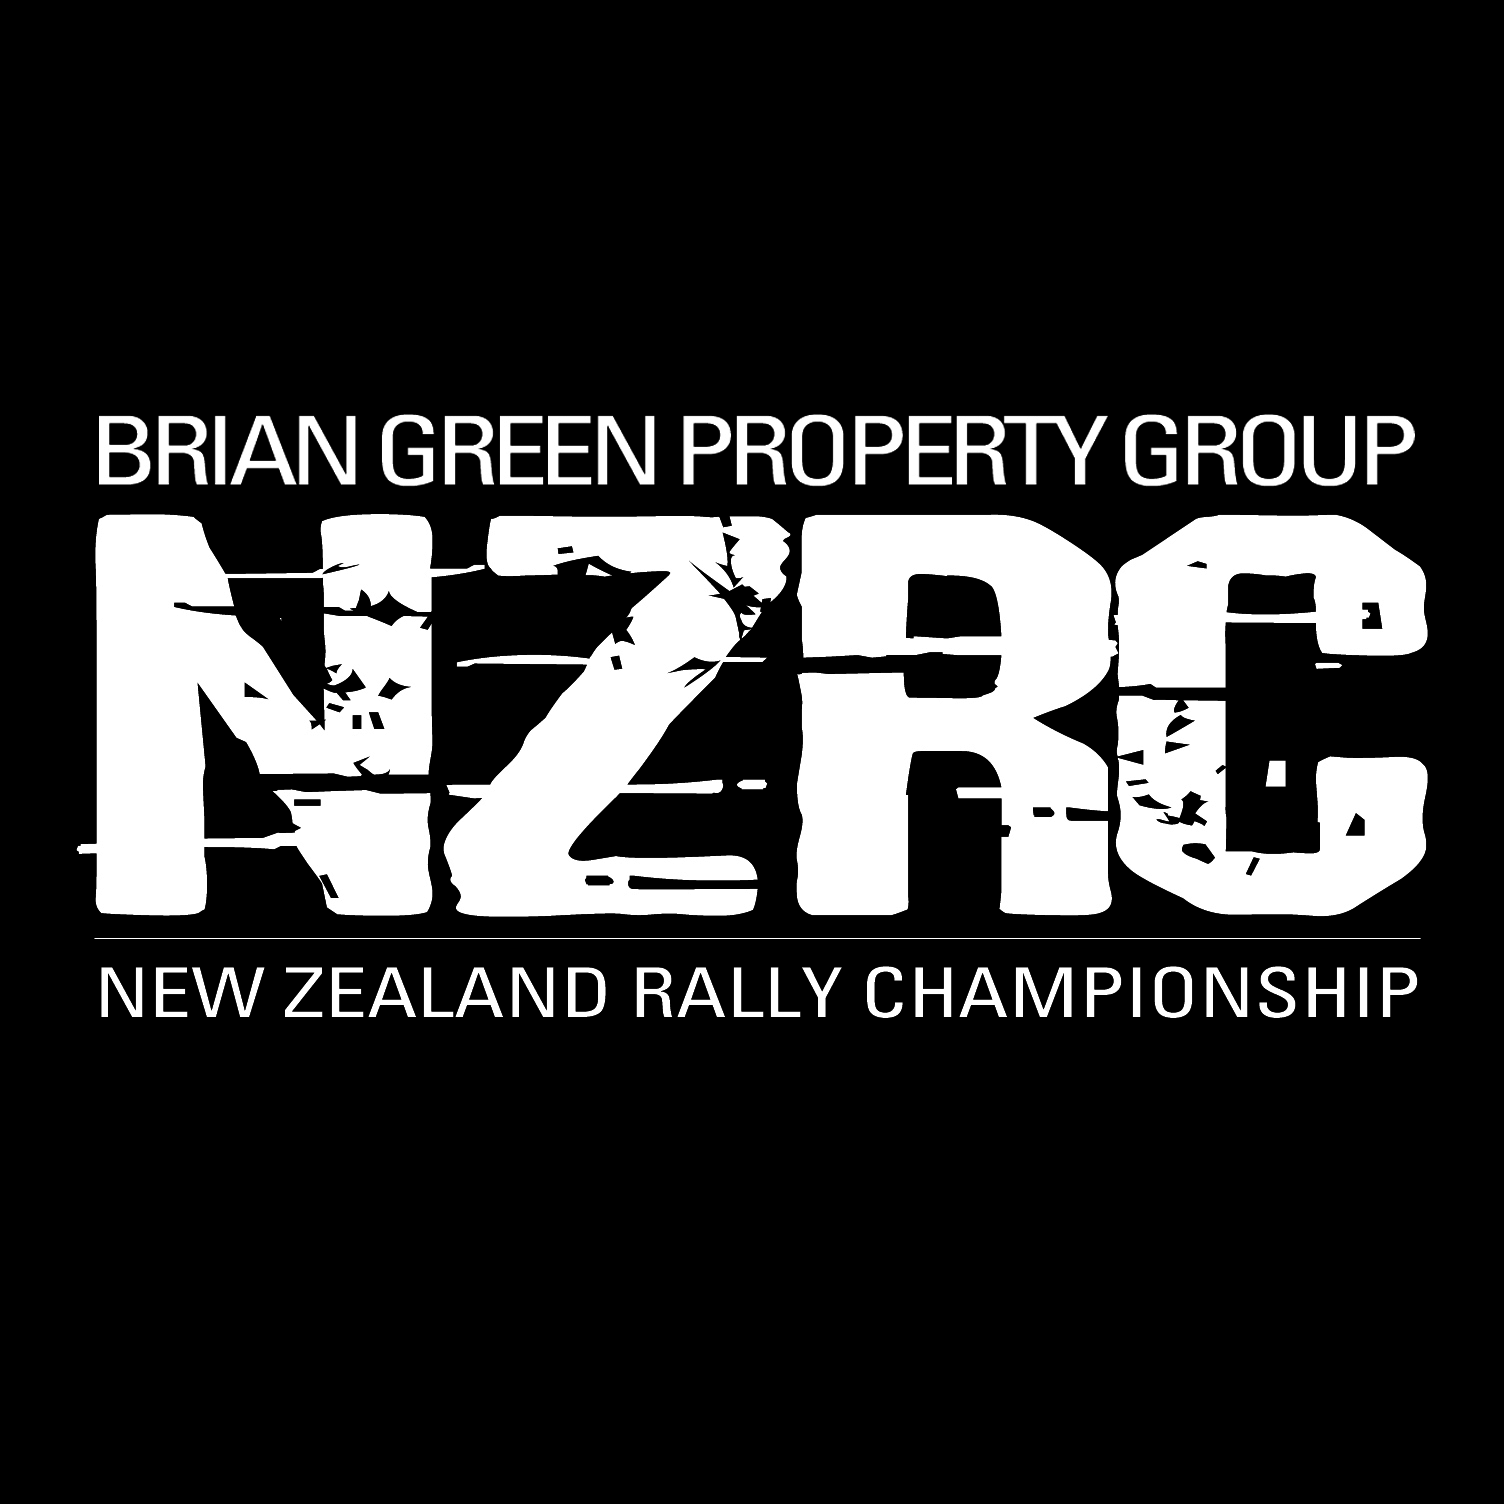 Paddon top as Hunt wins battle for second | :: Brian Green Property Group New Zealand Rally Championship ::